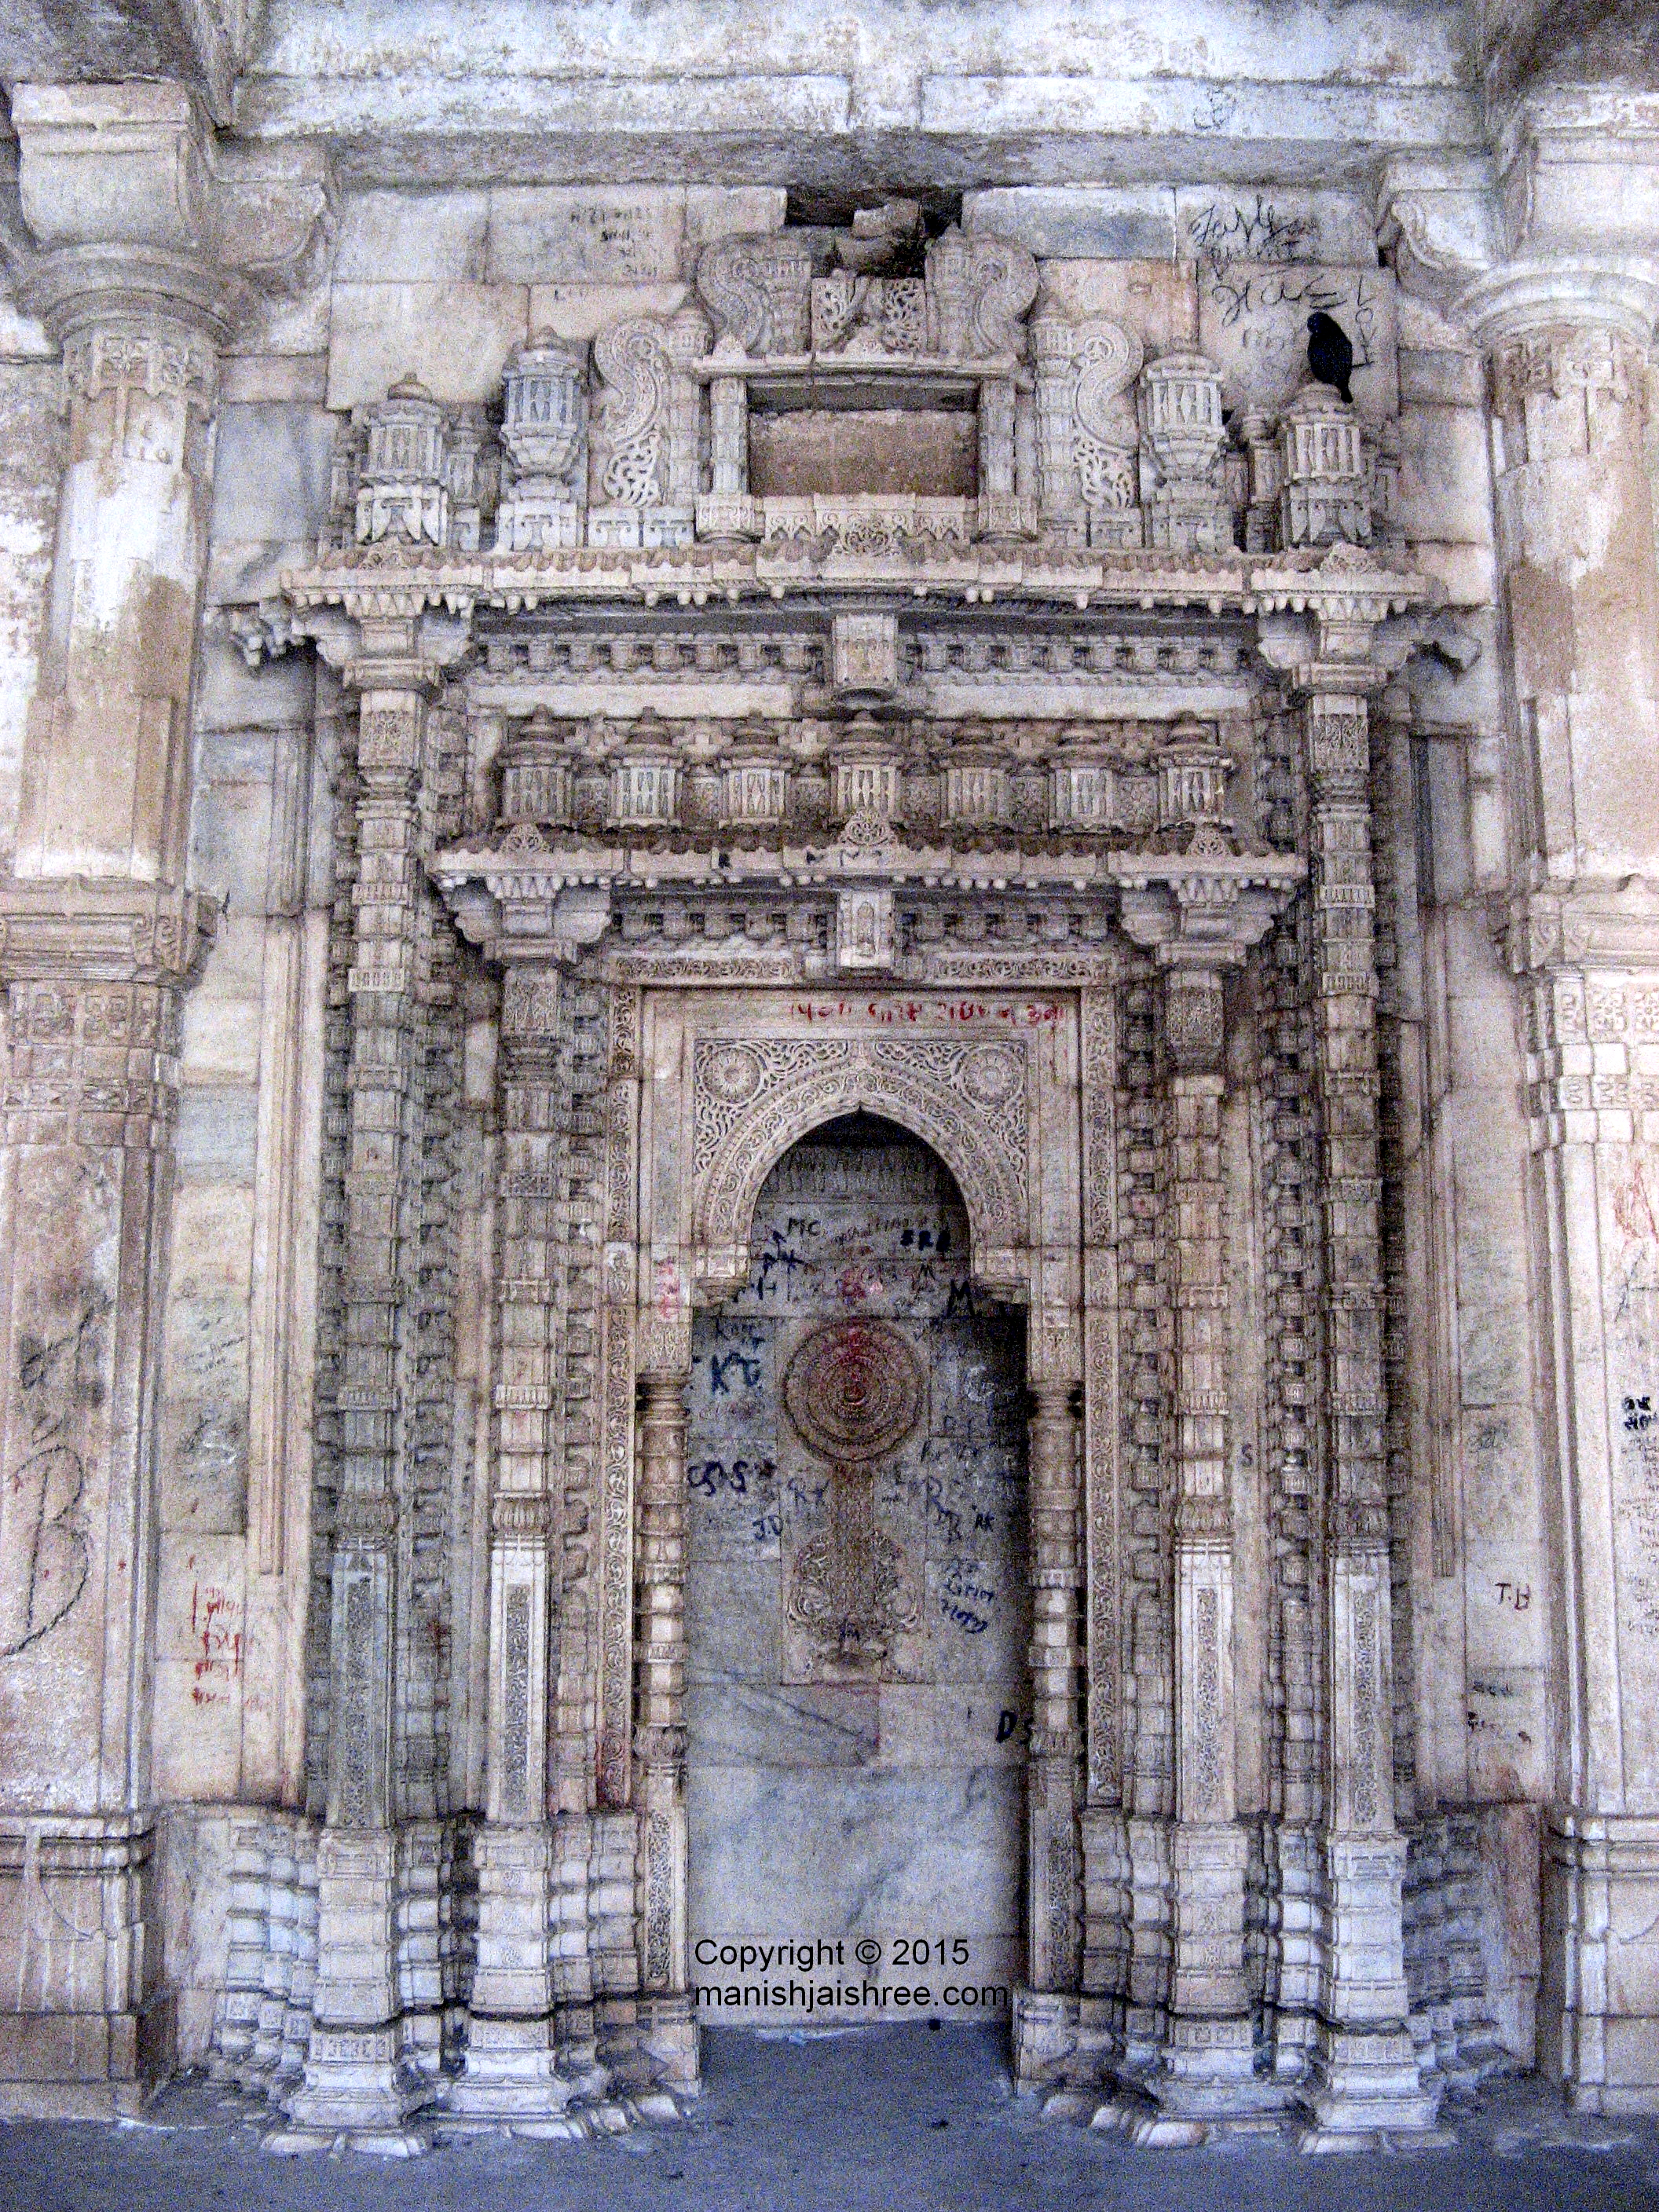 Intricate carving in Rani’s Palace, Uparkot Fort, Junagarh